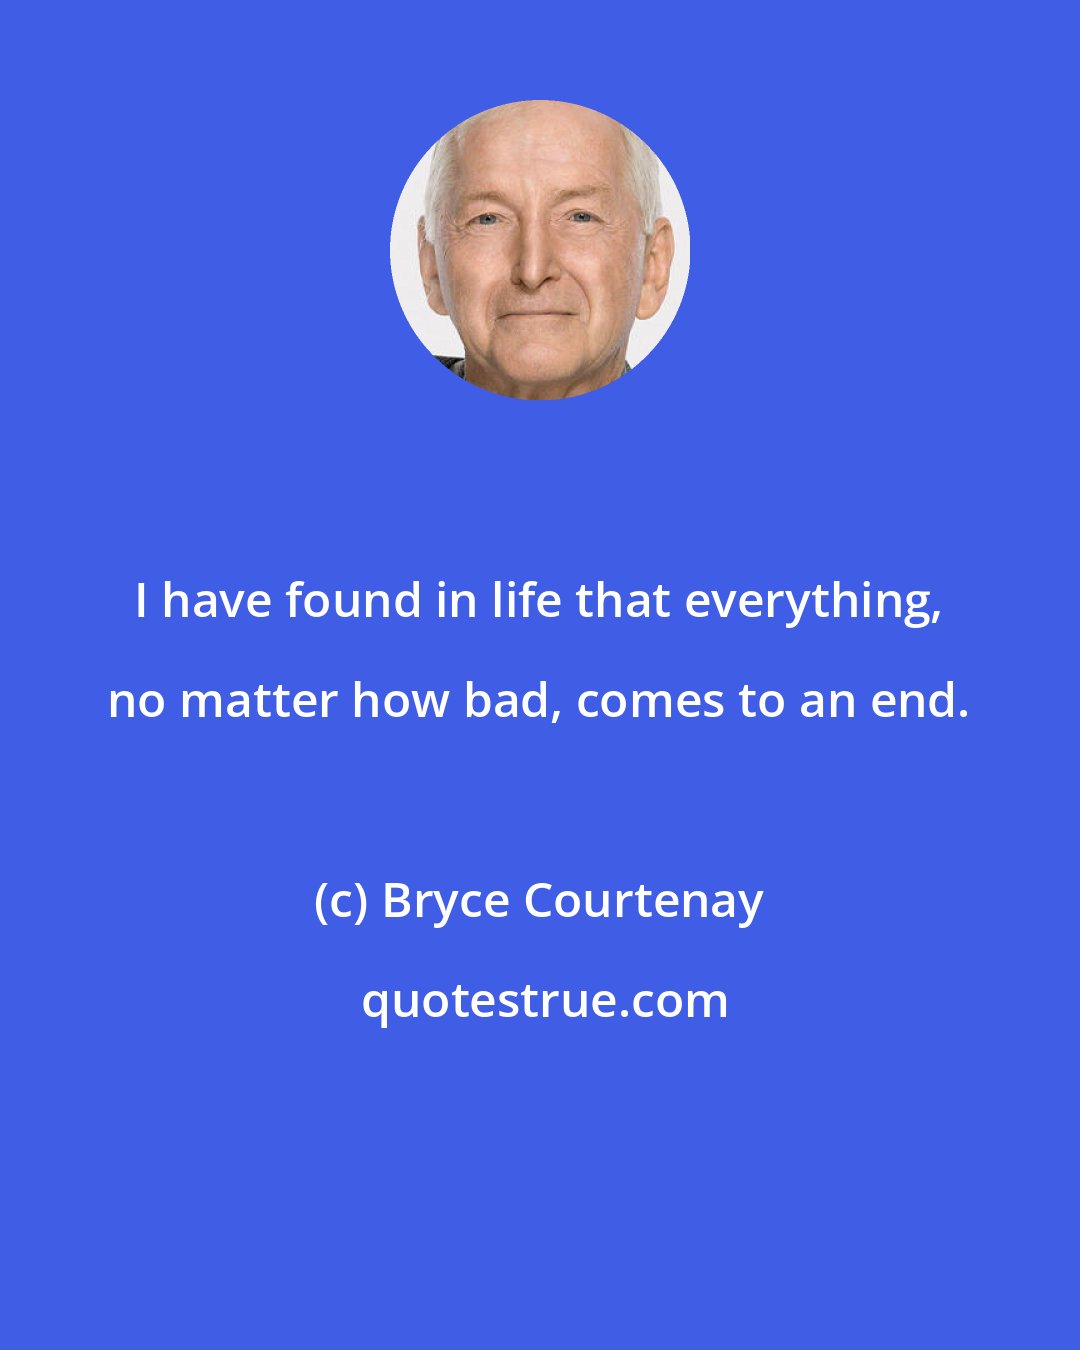 Bryce Courtenay: I have found in life that everything, no matter how bad, comes to an end.